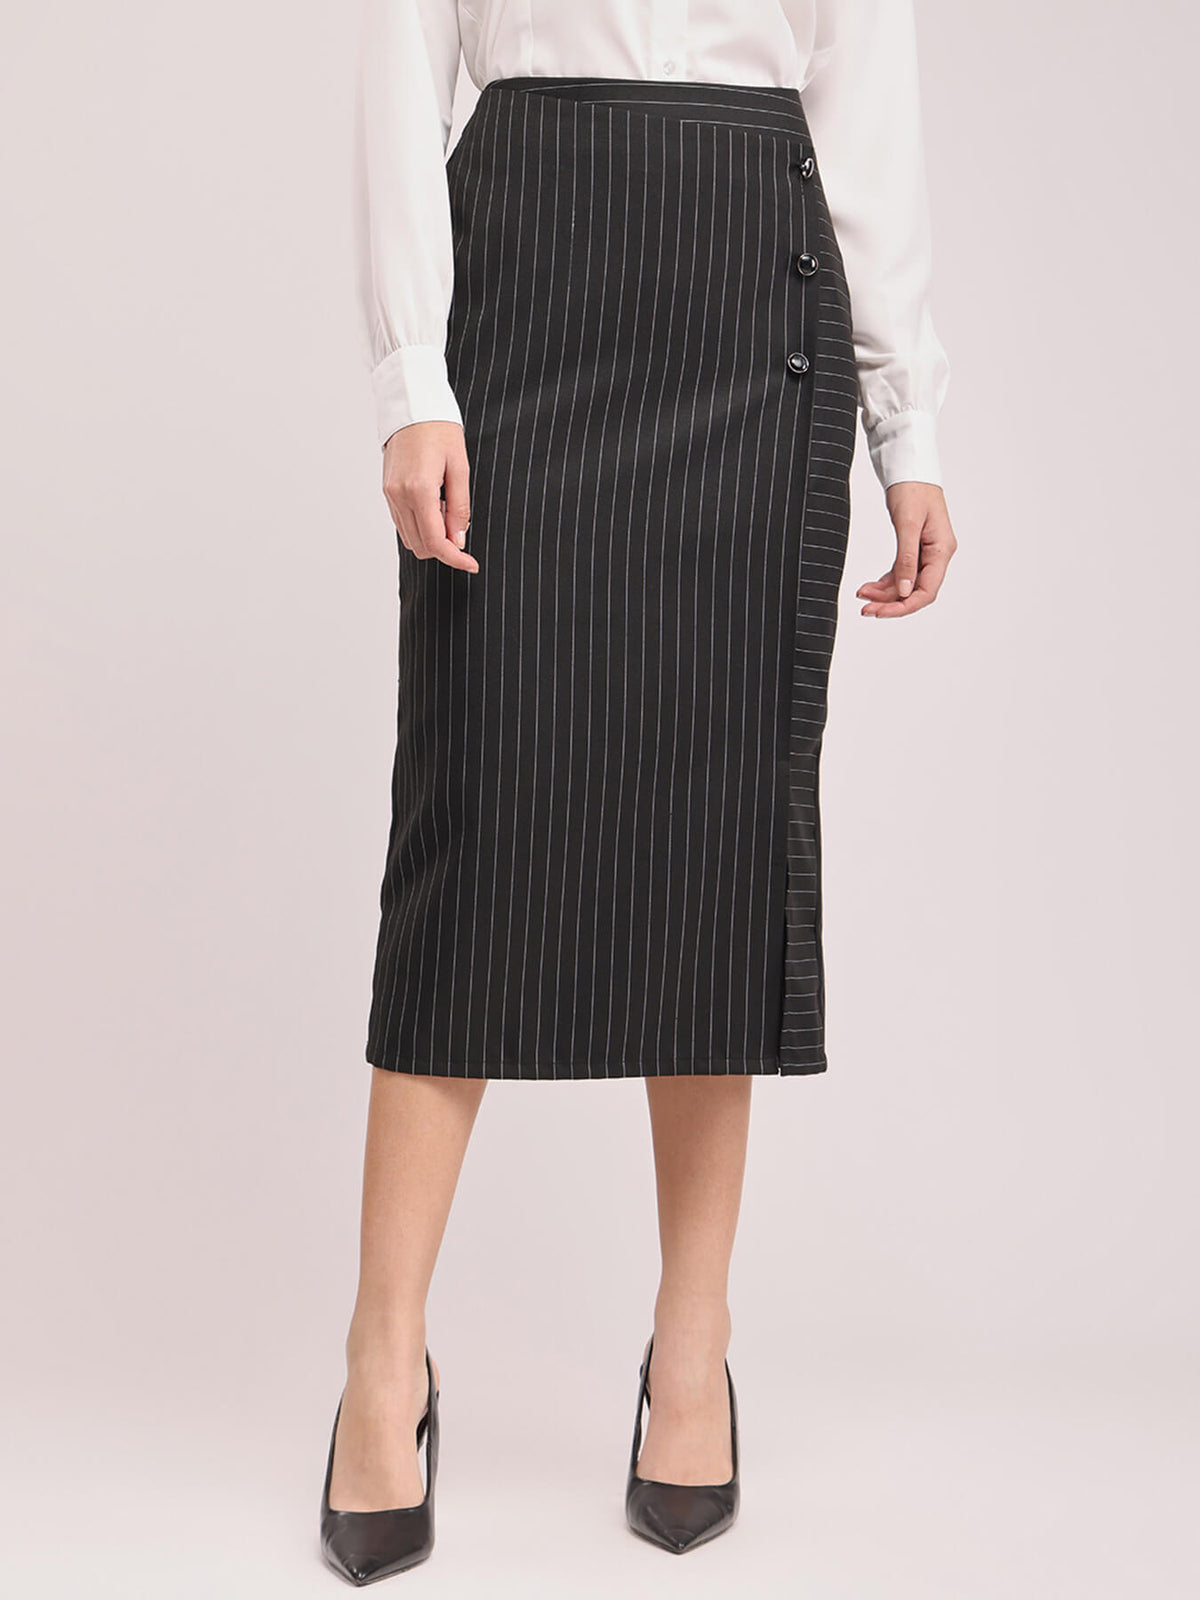 Straight Fit Skirt - Black And White